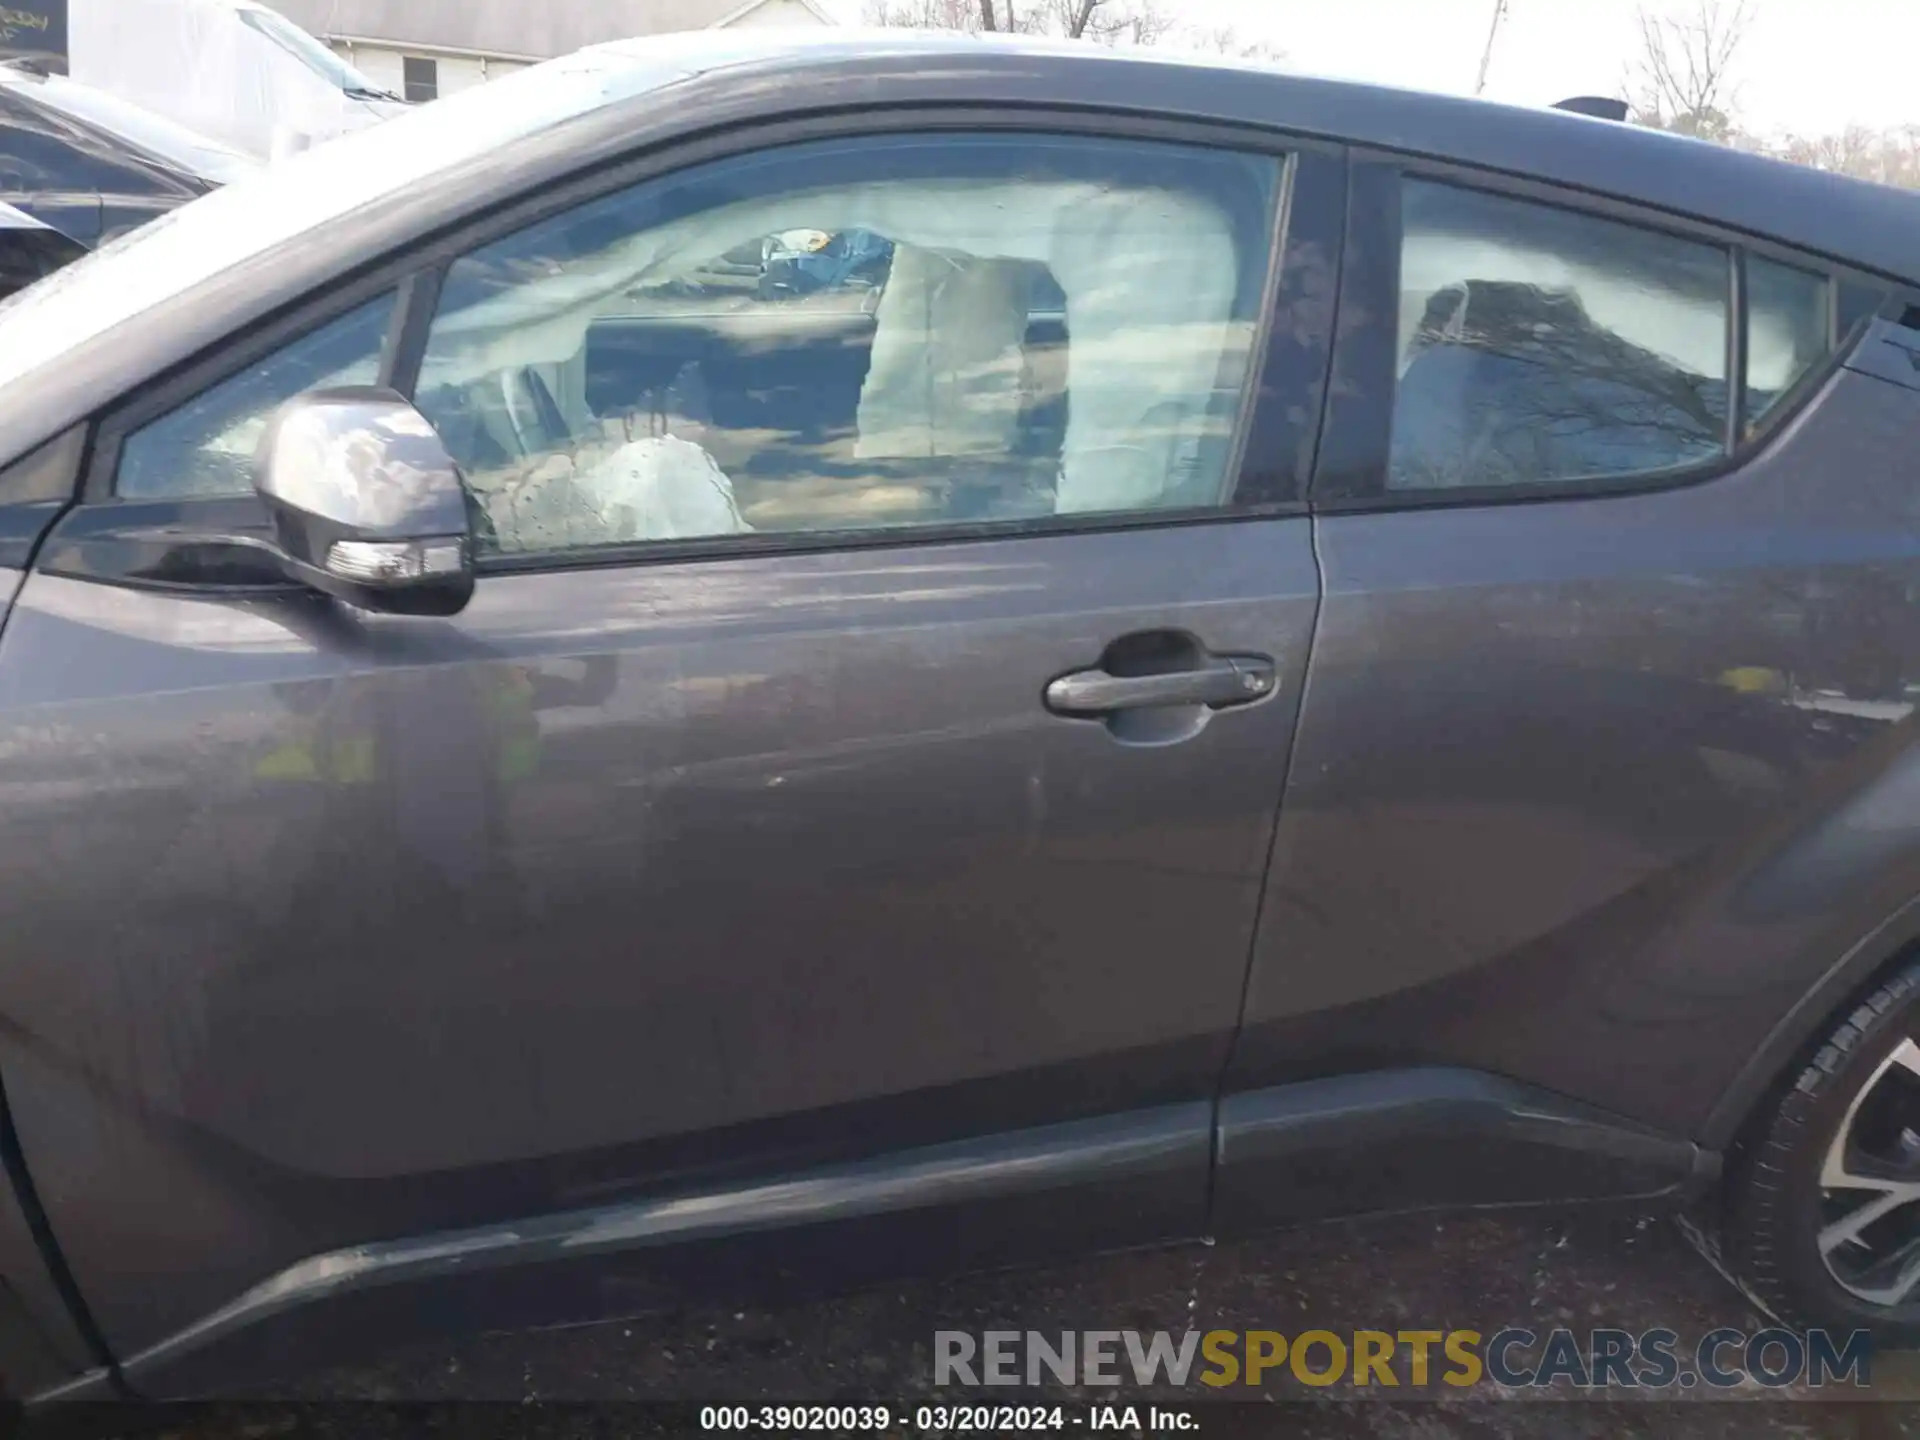 15 Photograph of a damaged car NMTKHMBXXNR145634 TOYOTA C-HR 2022